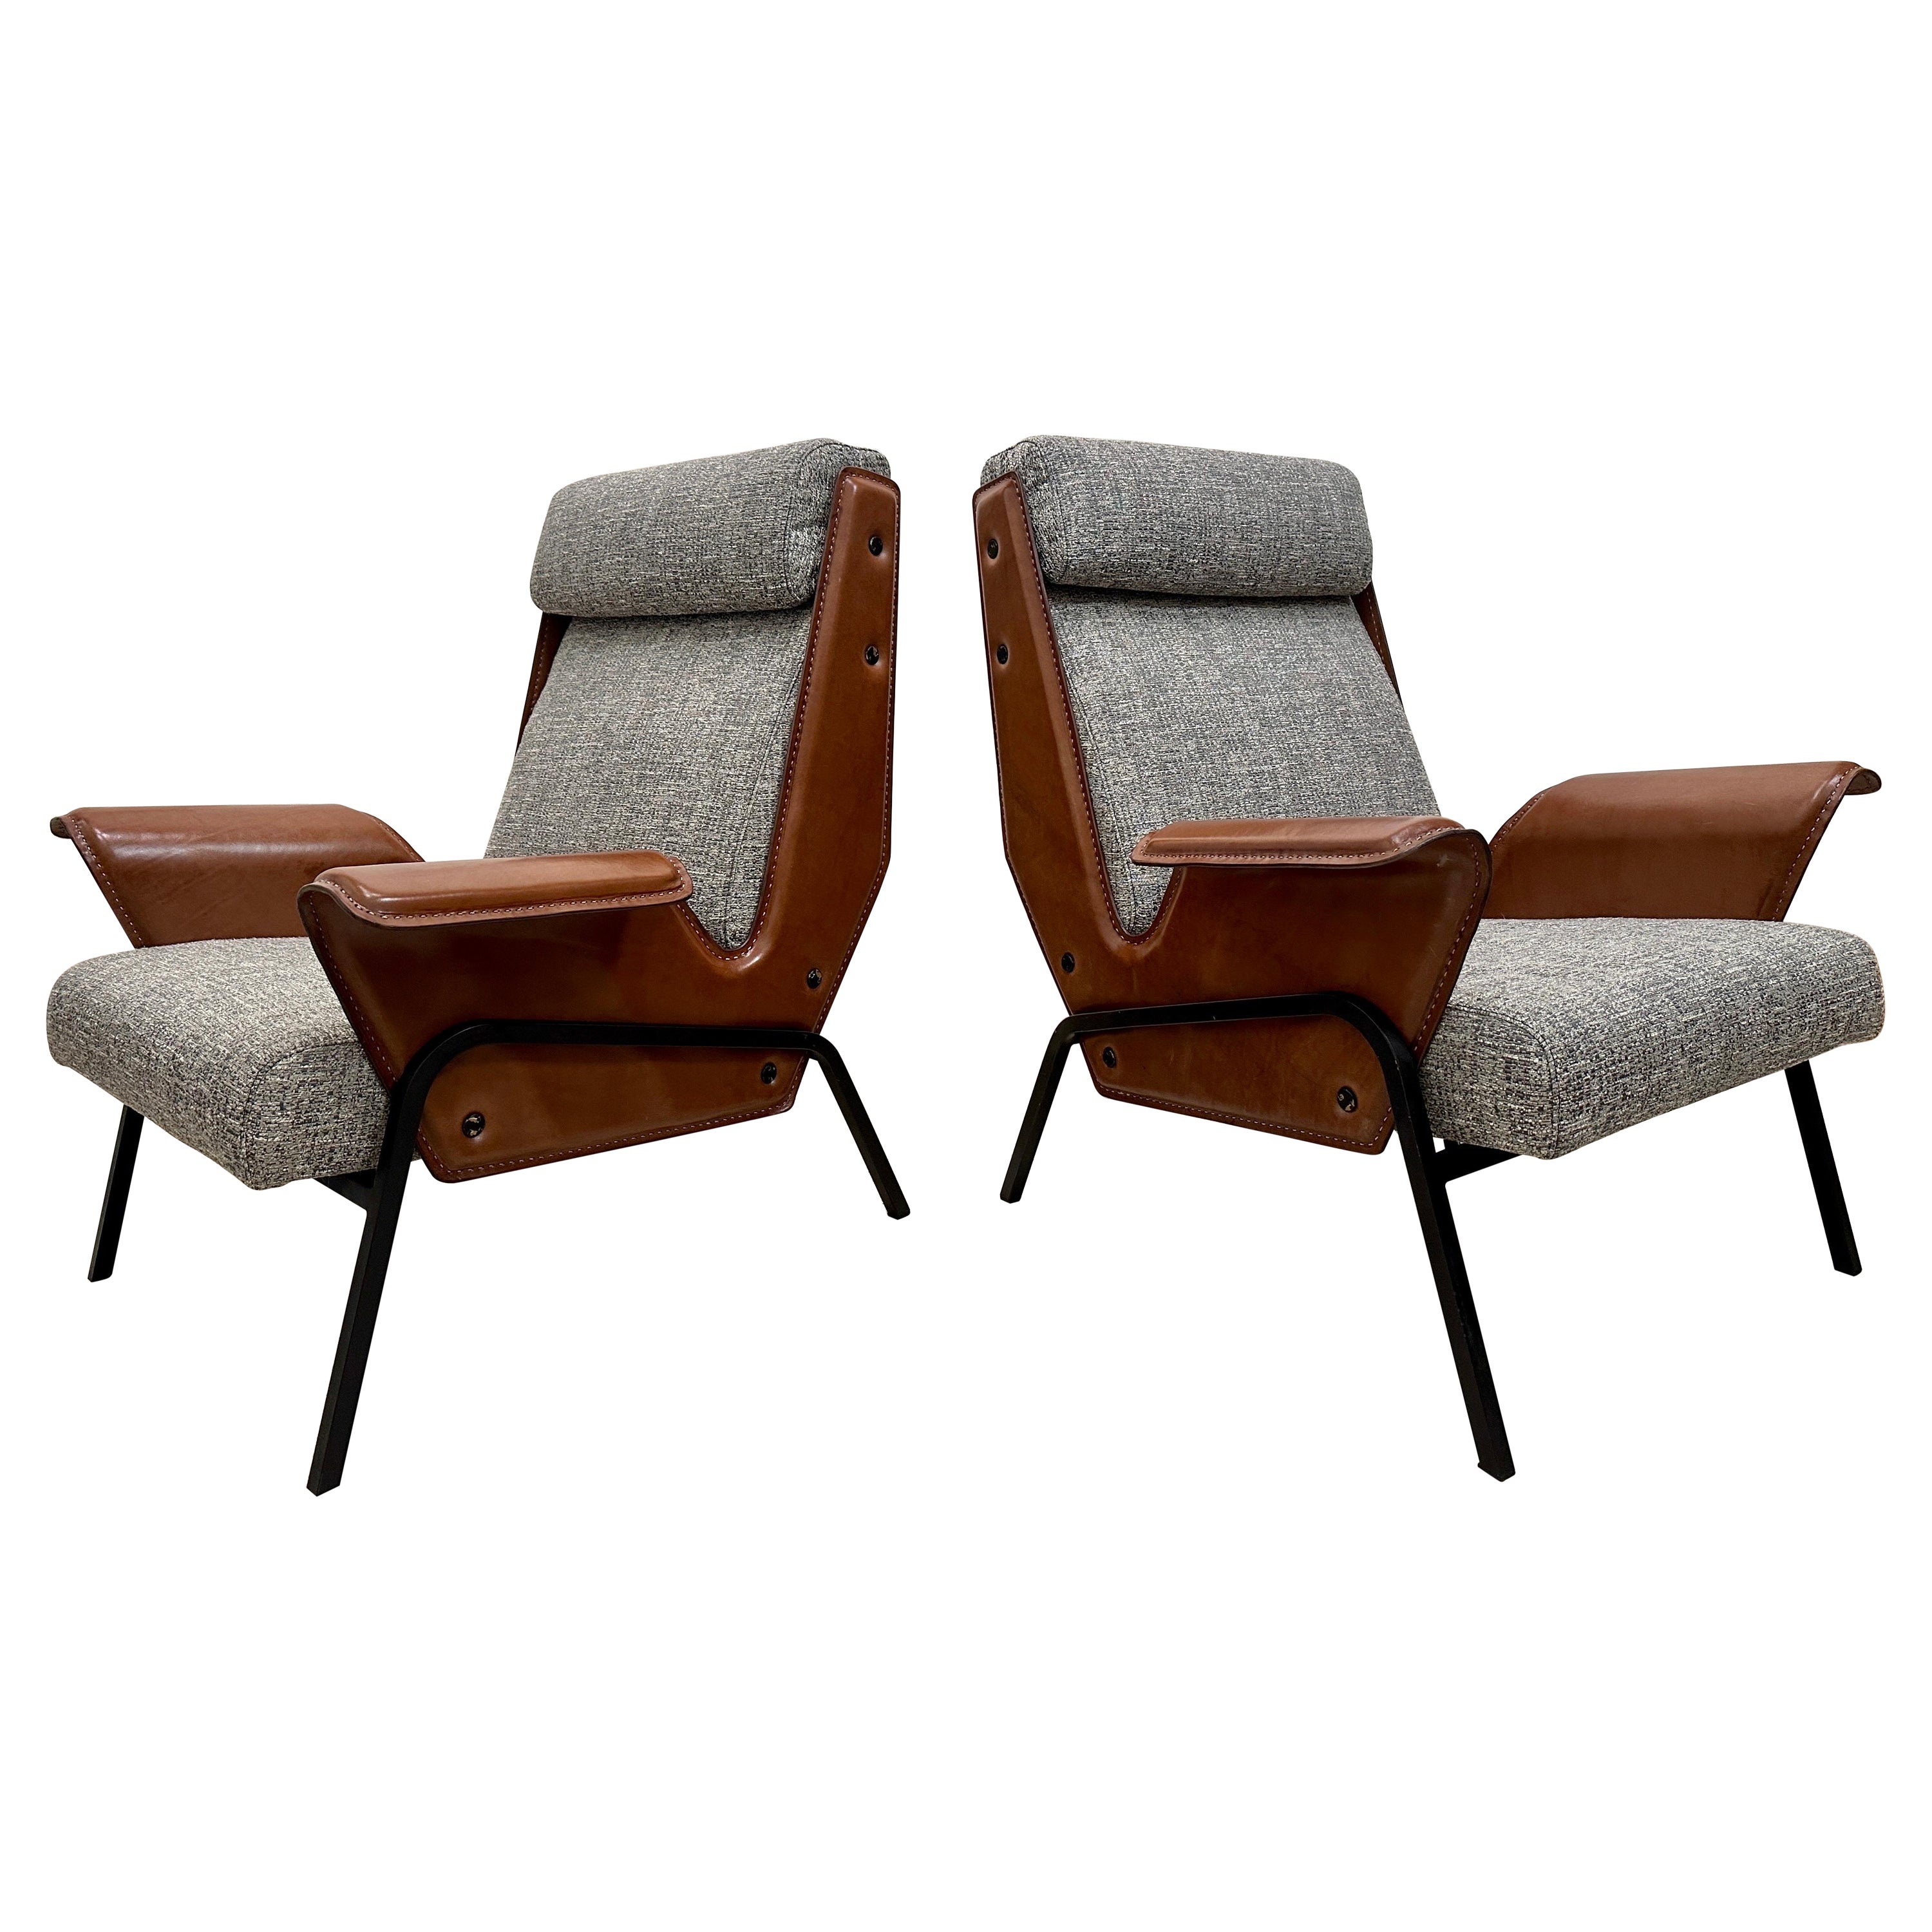 Pair of Alba Stitched Leather Lounge Chairs by Gustavo Pulitzer for Arflex